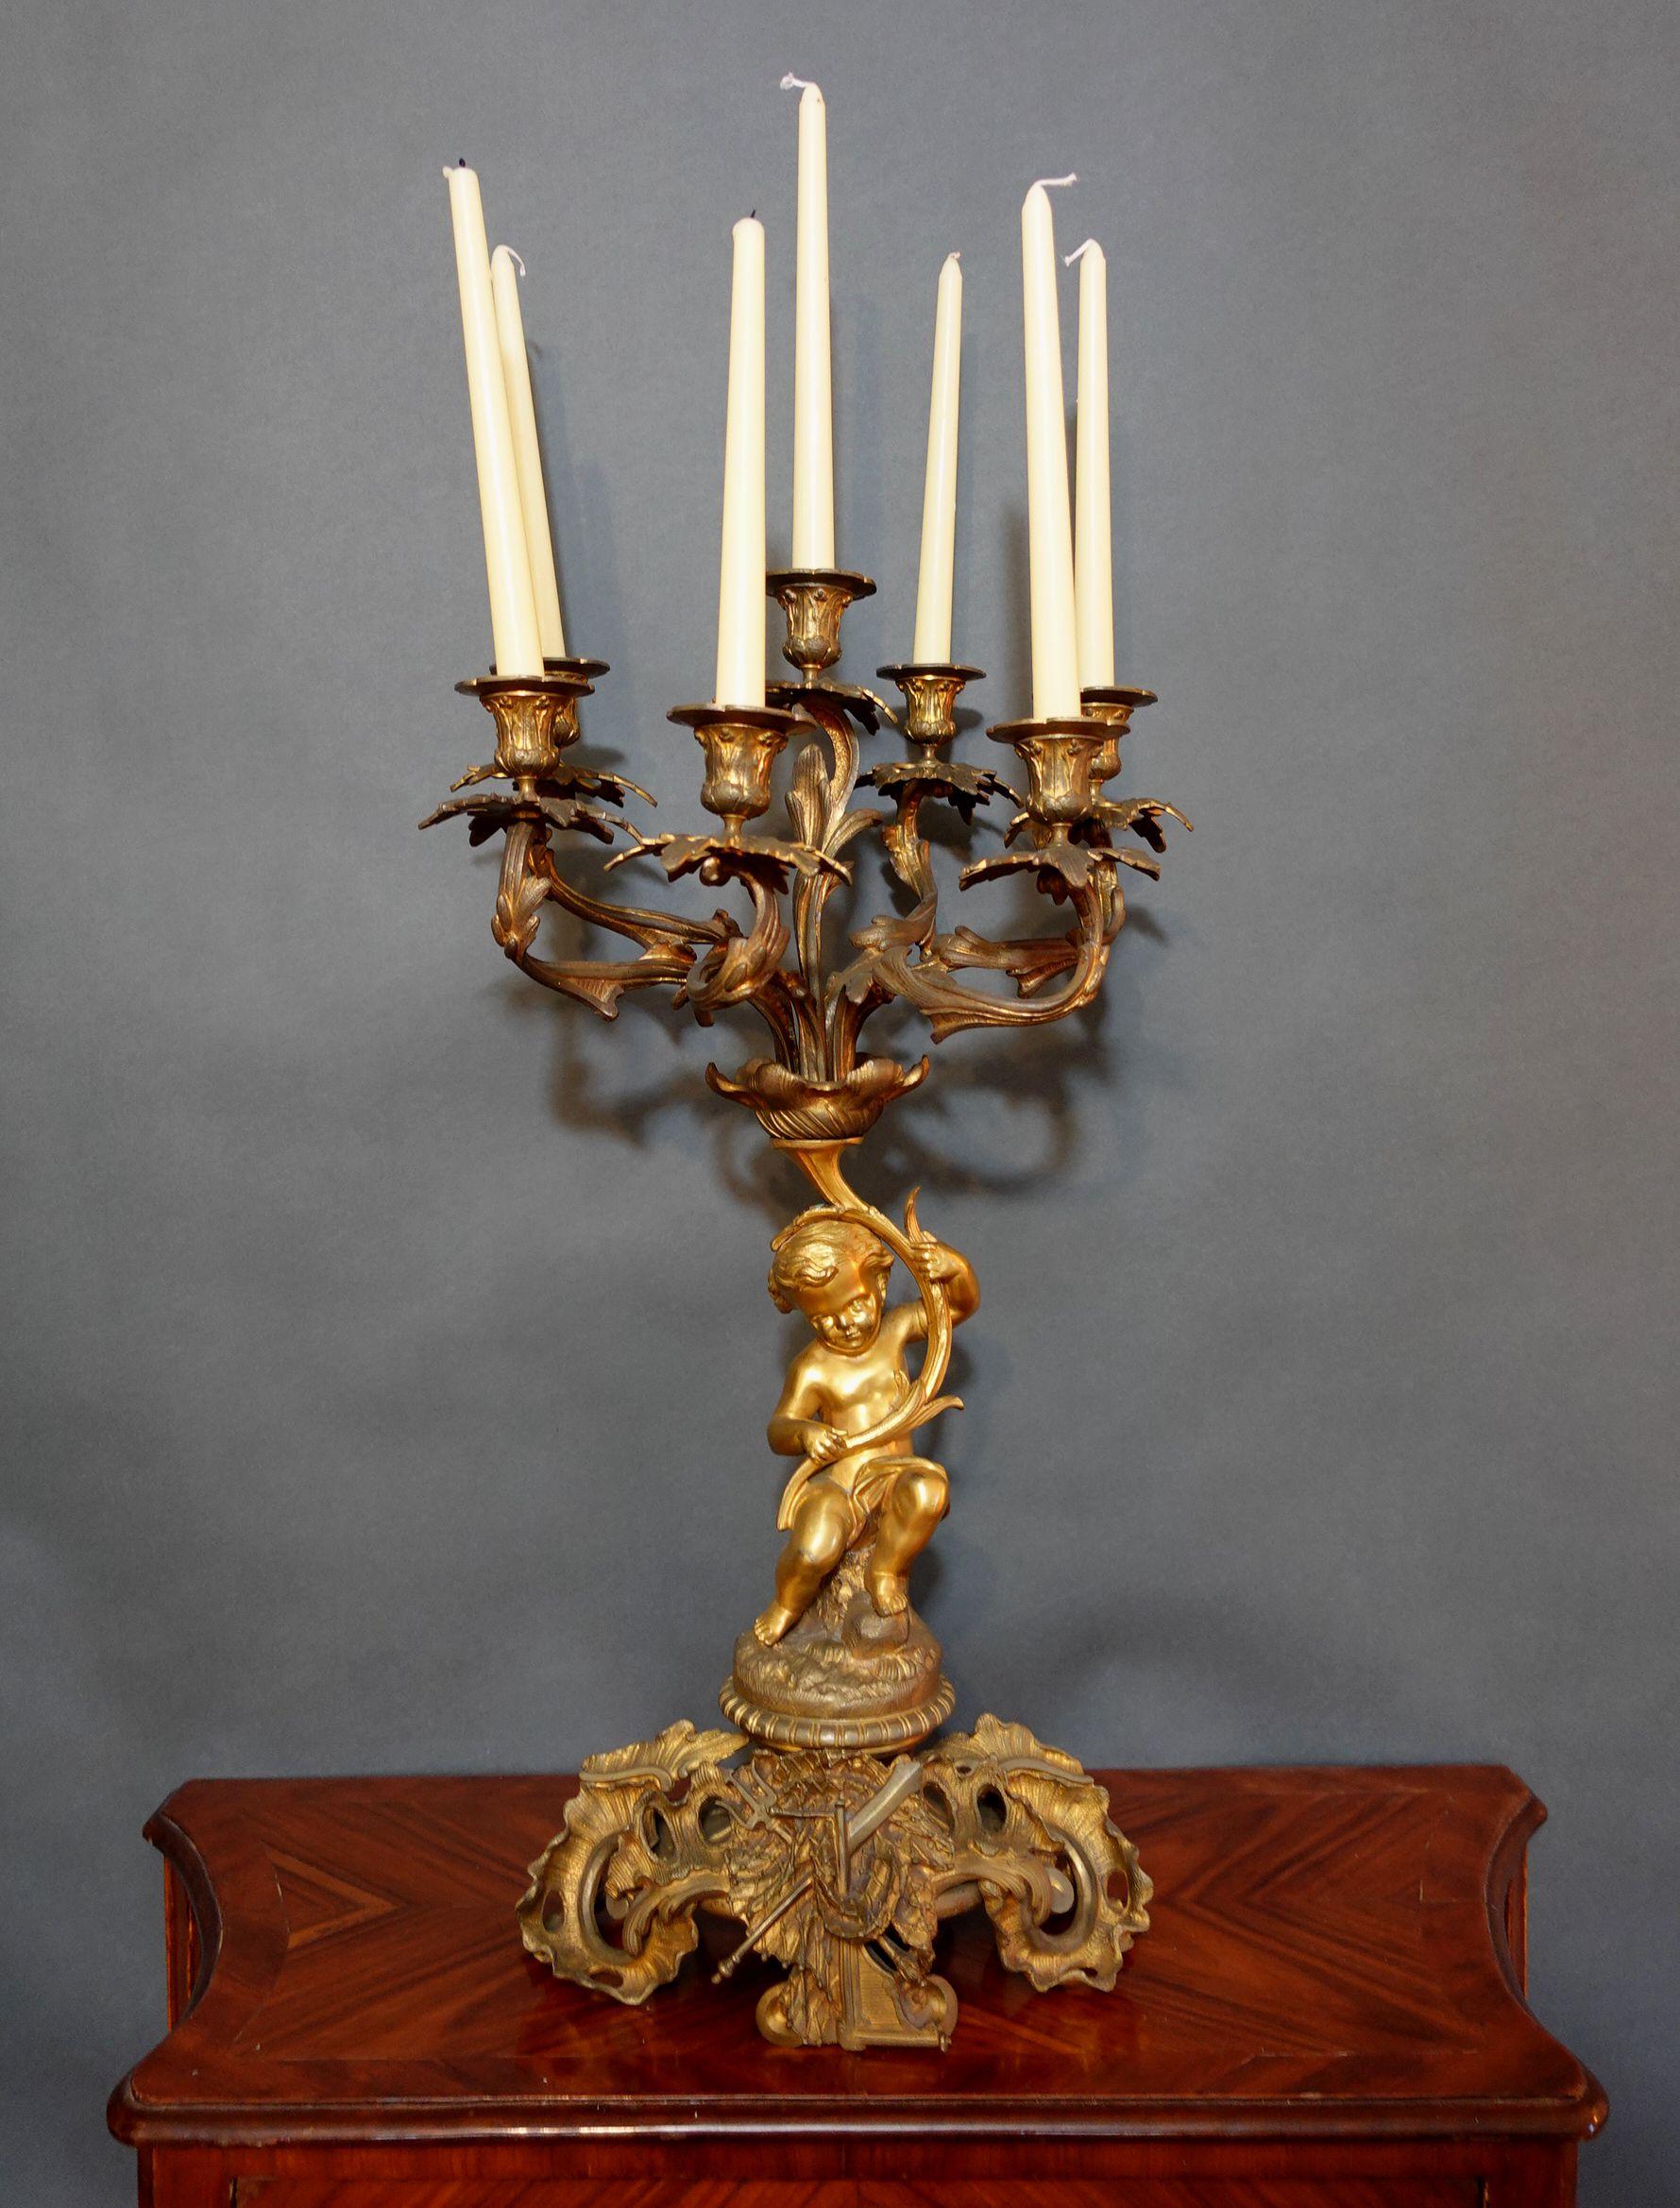 Large and heavy French Louis XV style candlesticks made of bronze candlesticks with intricated sculptural form through the entire piece.
Special gilt effect on the putti's body to make this figure very visible and catch the attention of it.
7